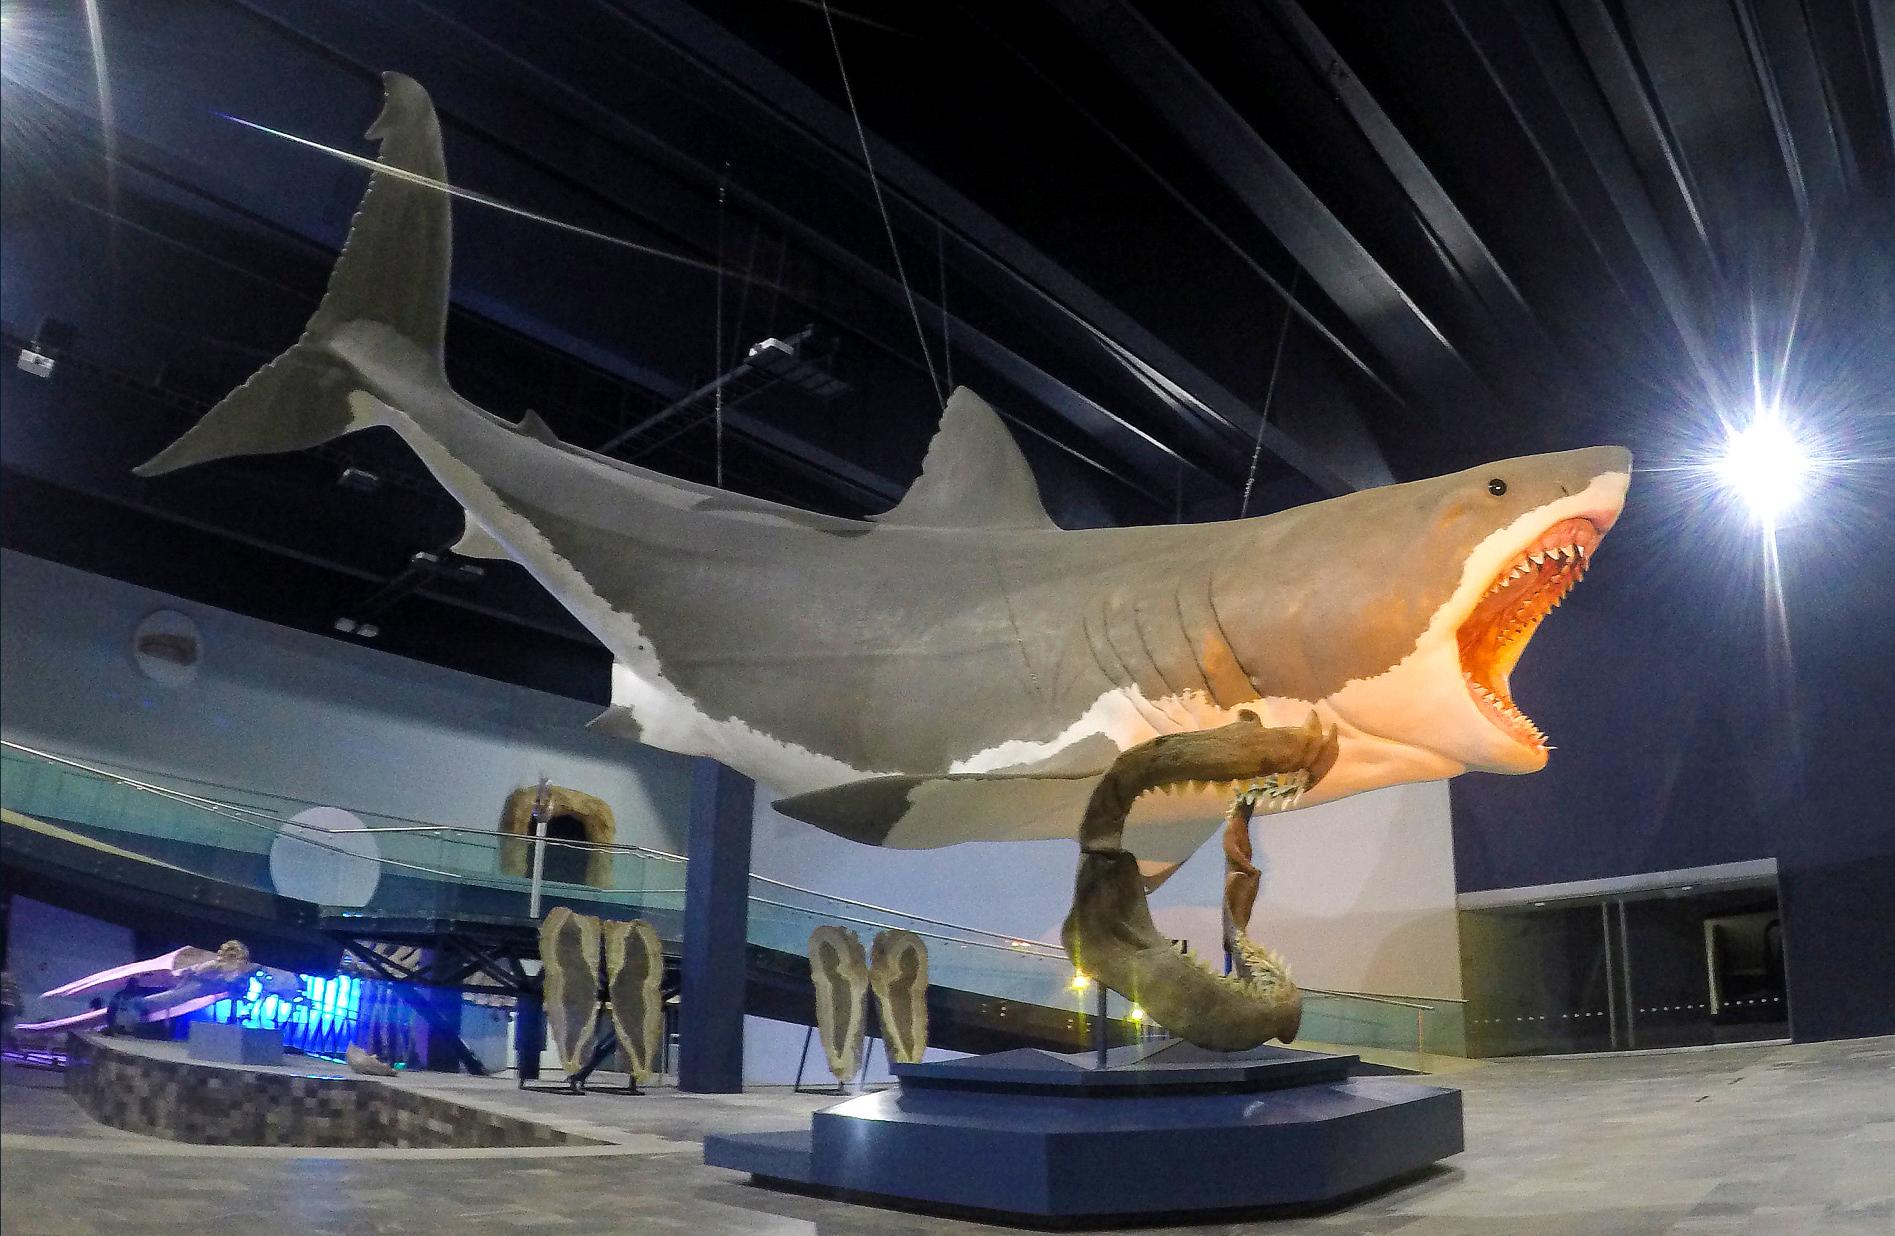 Artist's representation of a 16 meter long Megalodon shark at the Museum of Evolution, Puebla, Mexico.